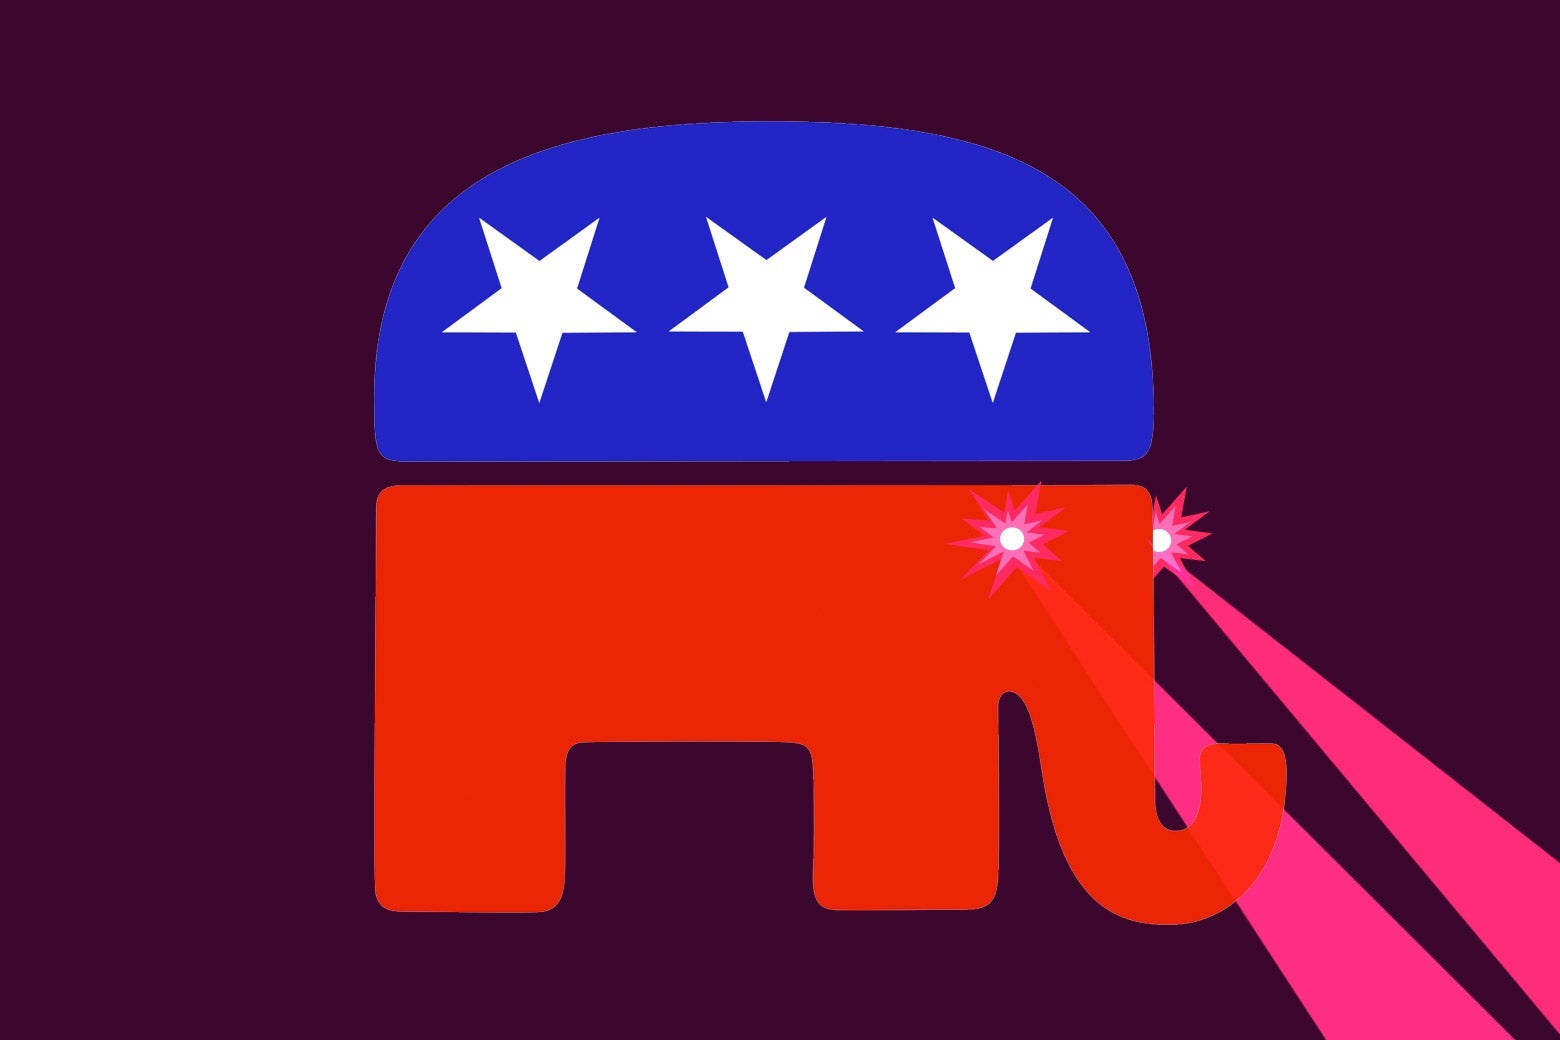 The Republican elephant mascot with laser eyes. 